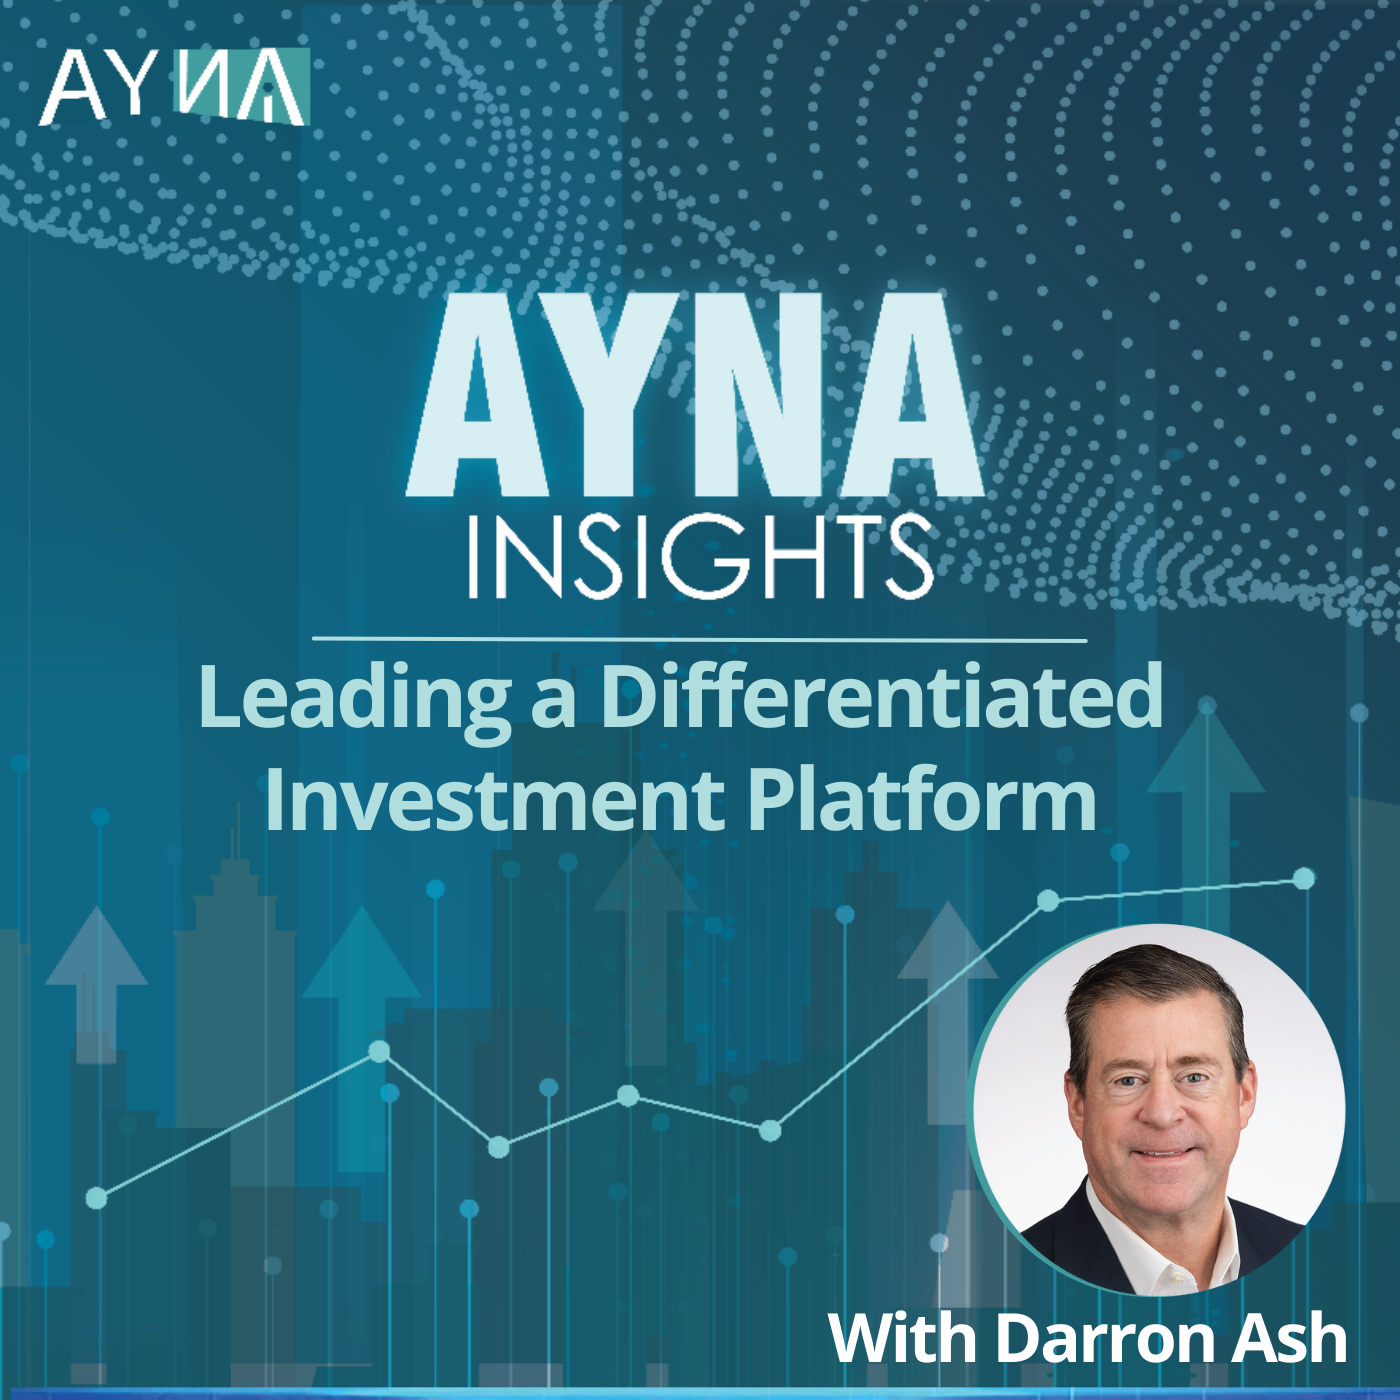 Darron Ash: Leading a Differentiated Investment Platform